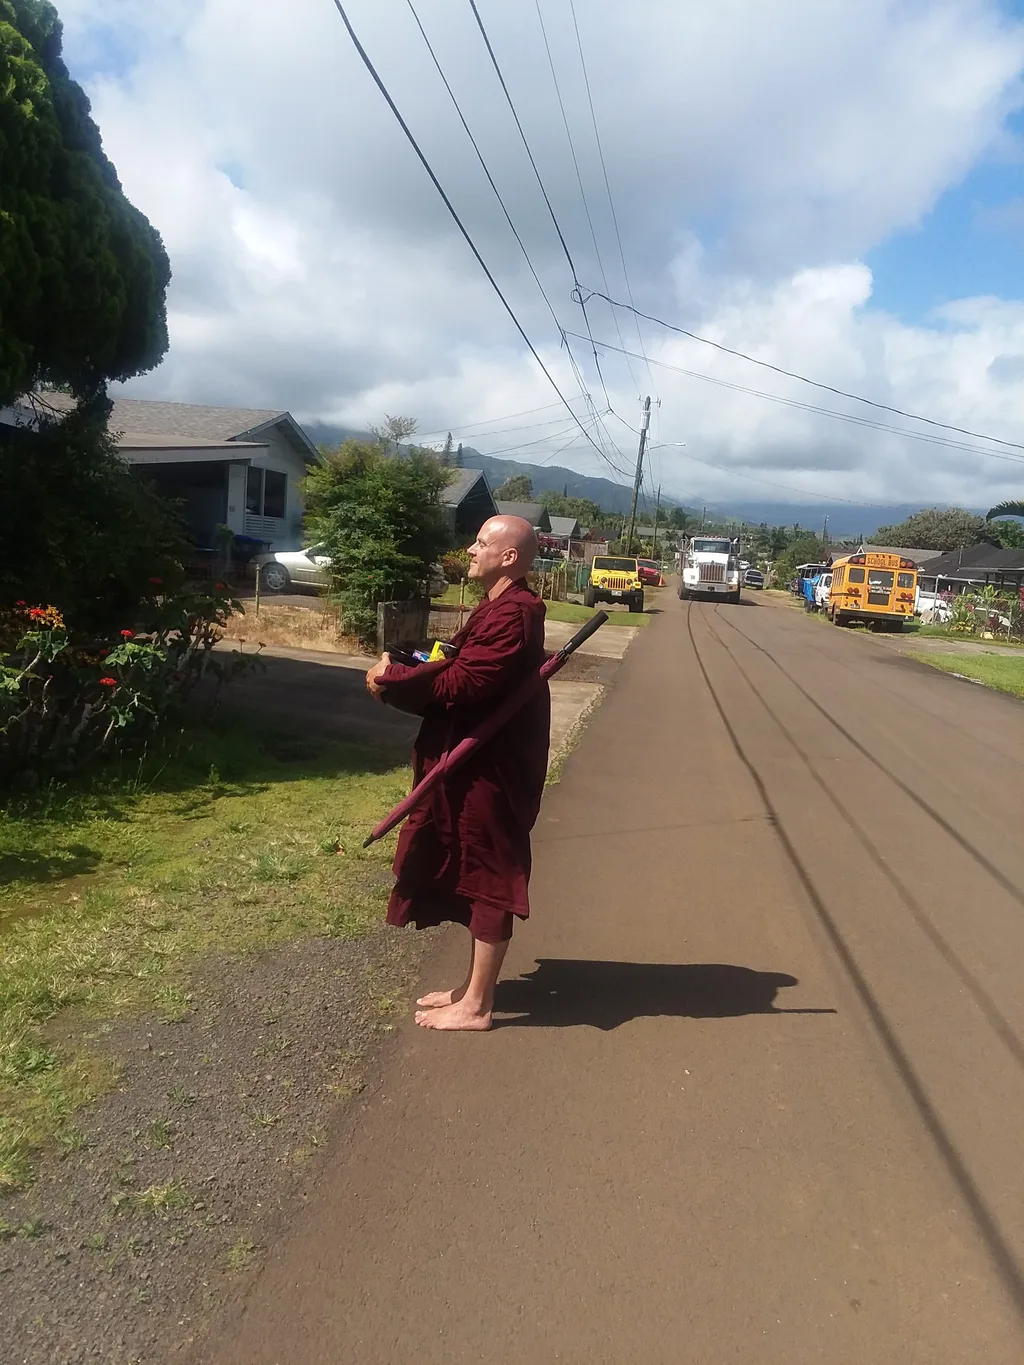 That is me going for alms on Aalona Street Kilauea.